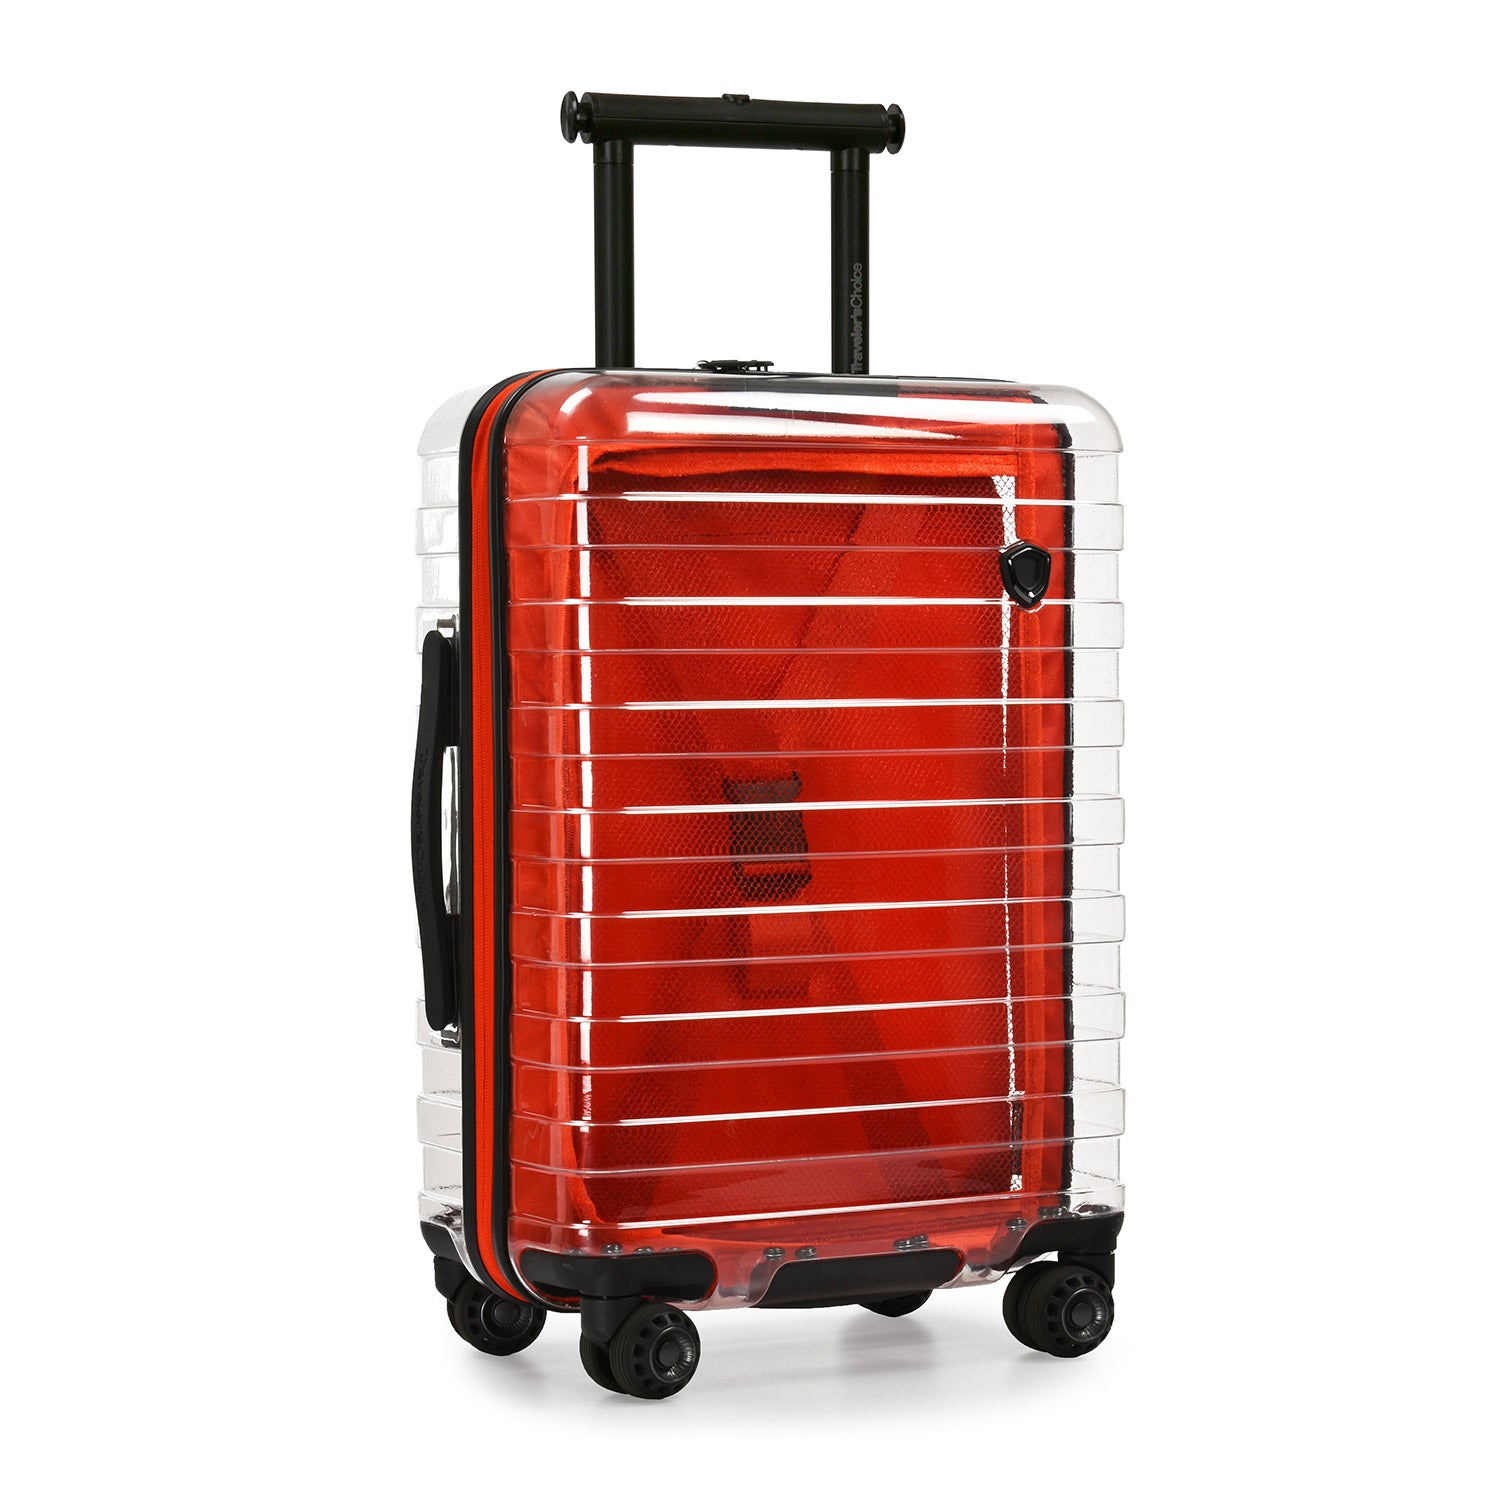 The Millennial II Transparent Carry-On 22&quot; Hardside Spinner Luggage